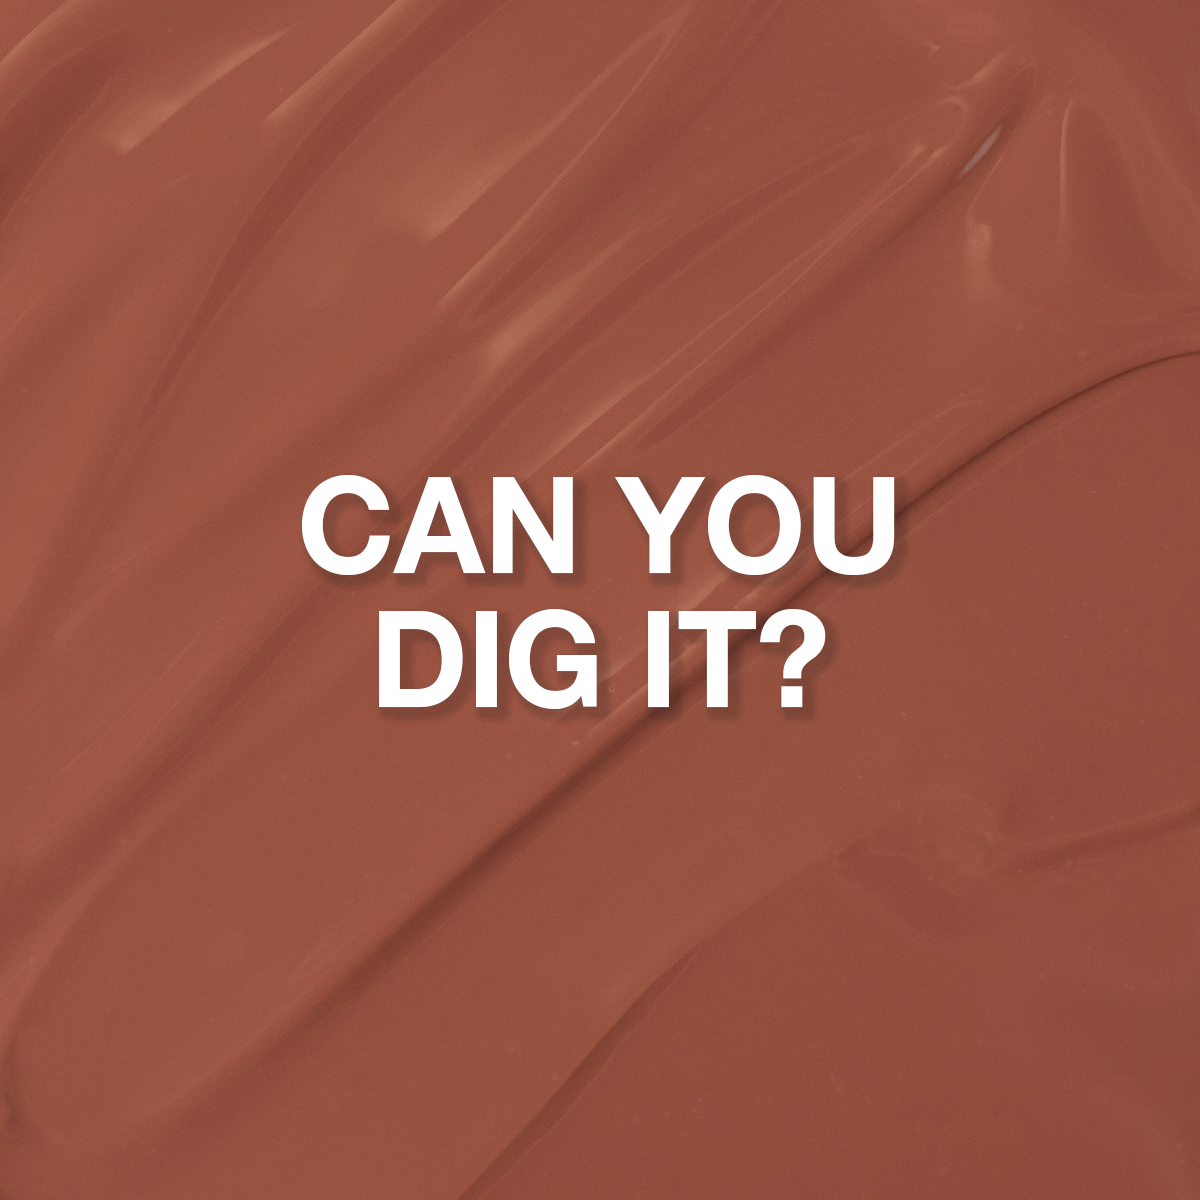 Can You Dig It? ButterCream